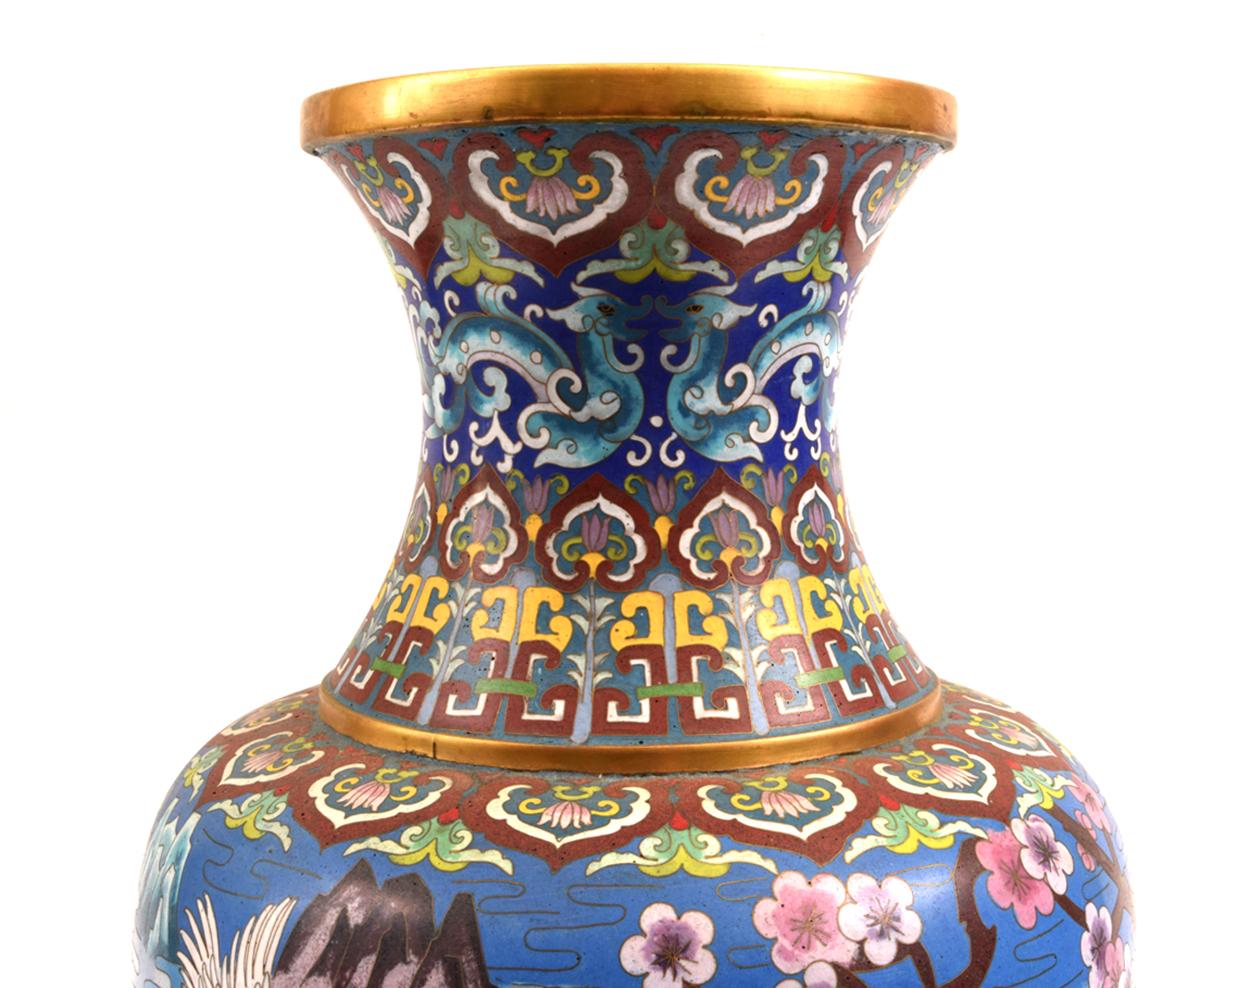 Very Large Decorative Cloisonné with Blossom Flowers Vase or Piece 4